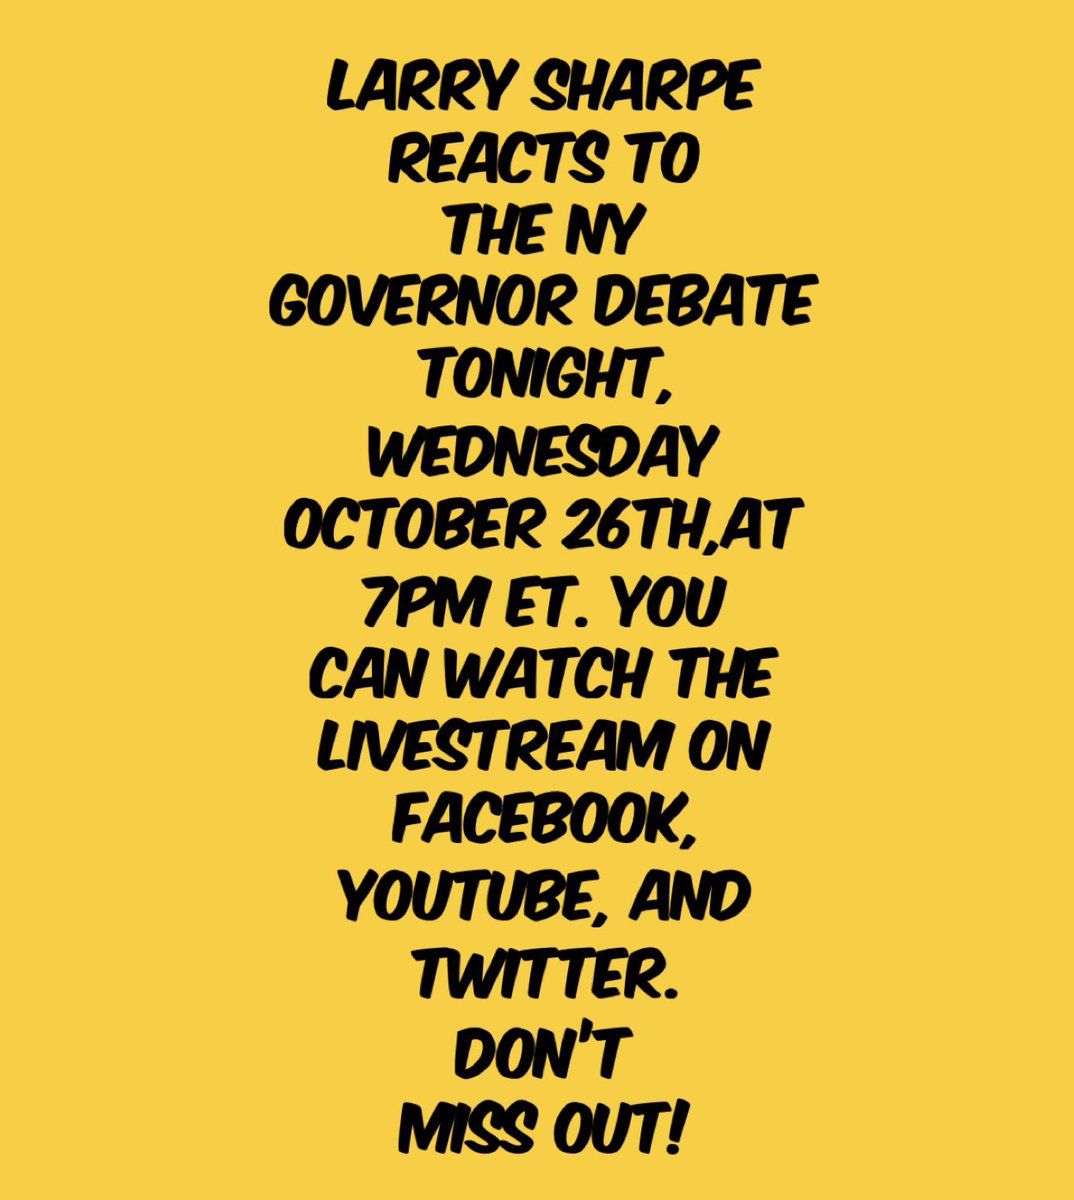 Please do join me for a livestream TONIGHT, Wednesday Oct 26th, at 7pm ET. I’ll be reacting to last night’s NY Governor Debate.
#WriteInLarrySharpe #aNewNY #Sharpe4Gov #DontGiveUpNY #NYGovDebate #Hochul #Zeldin